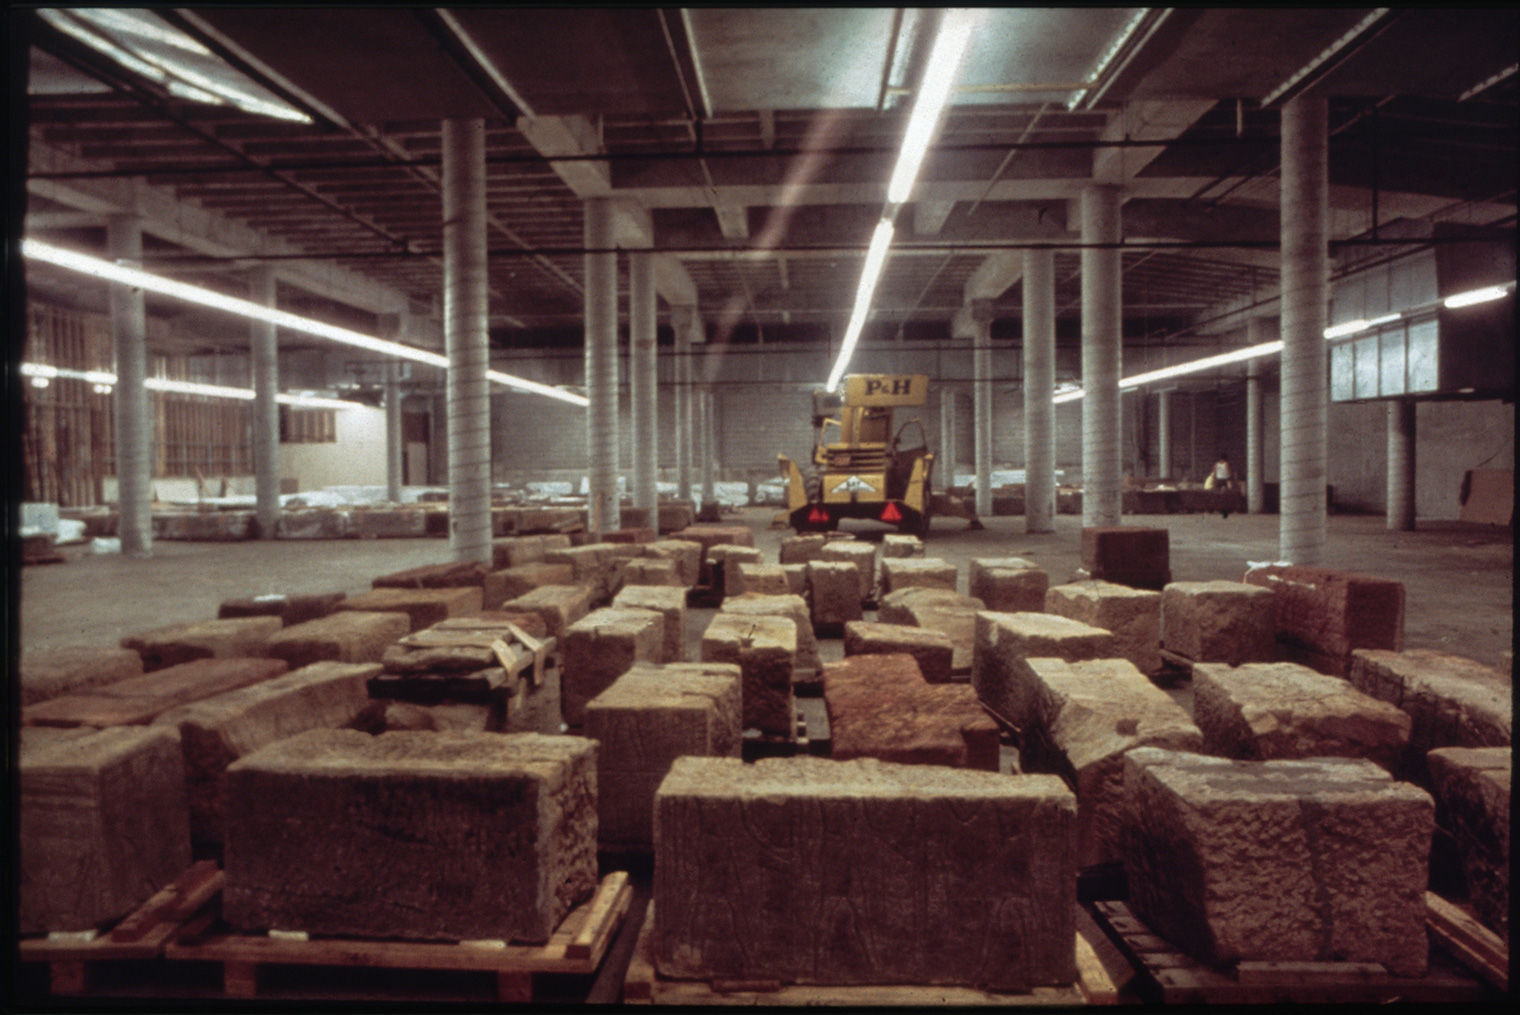 Temple blocks in storage in the Museum's North Parking Garage prior to conservation treatment, early 1970s.